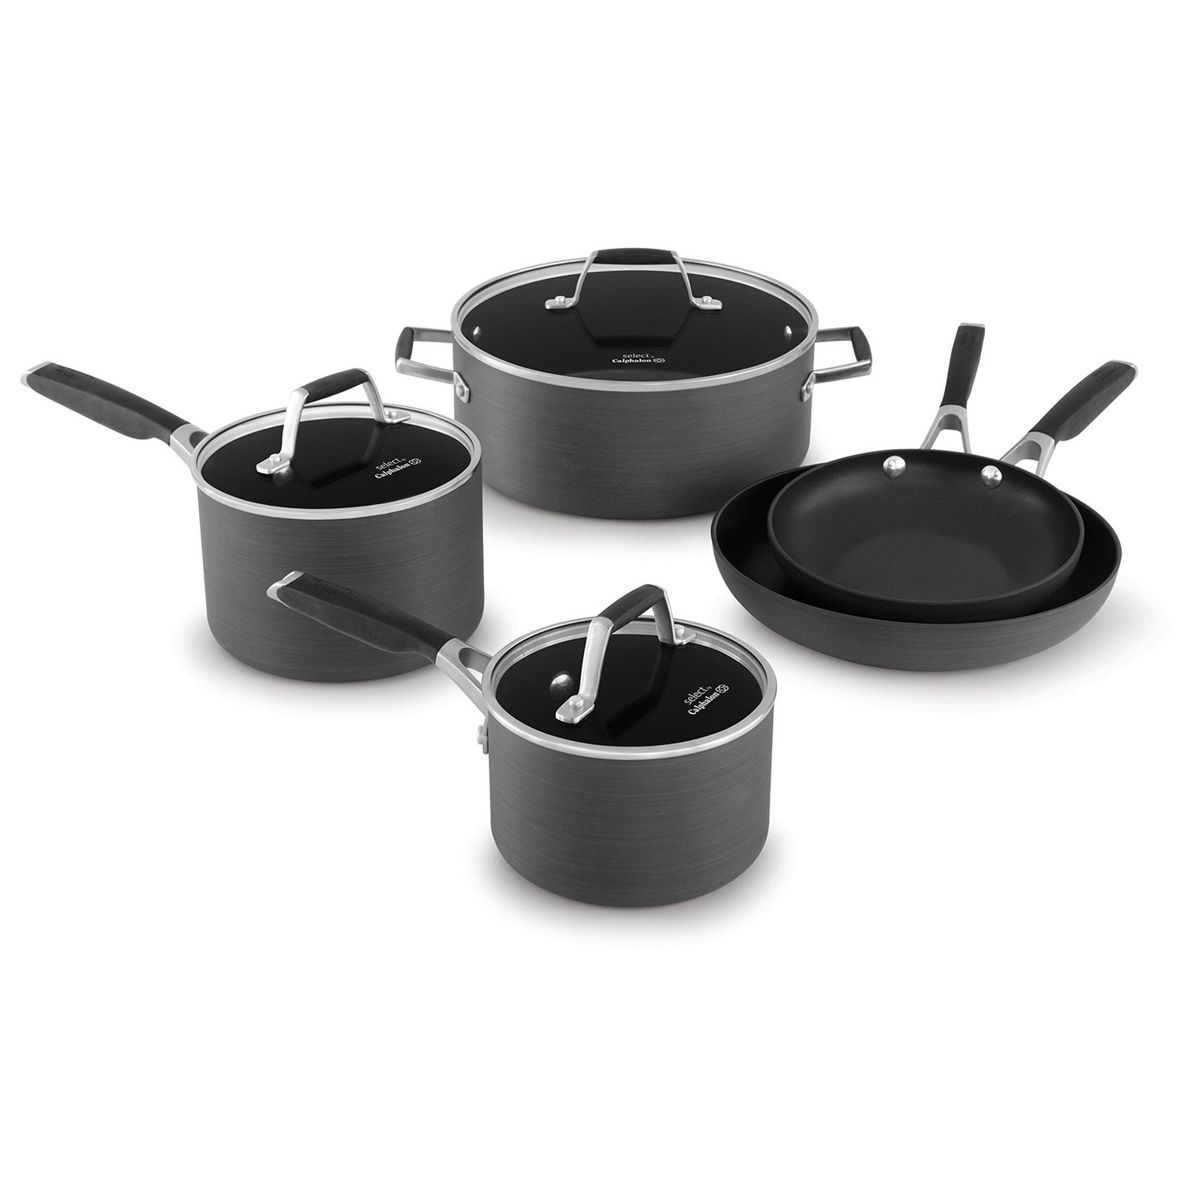 Select by Calphalon with AquaShield Nonstick 8pc Cookware Set | Target